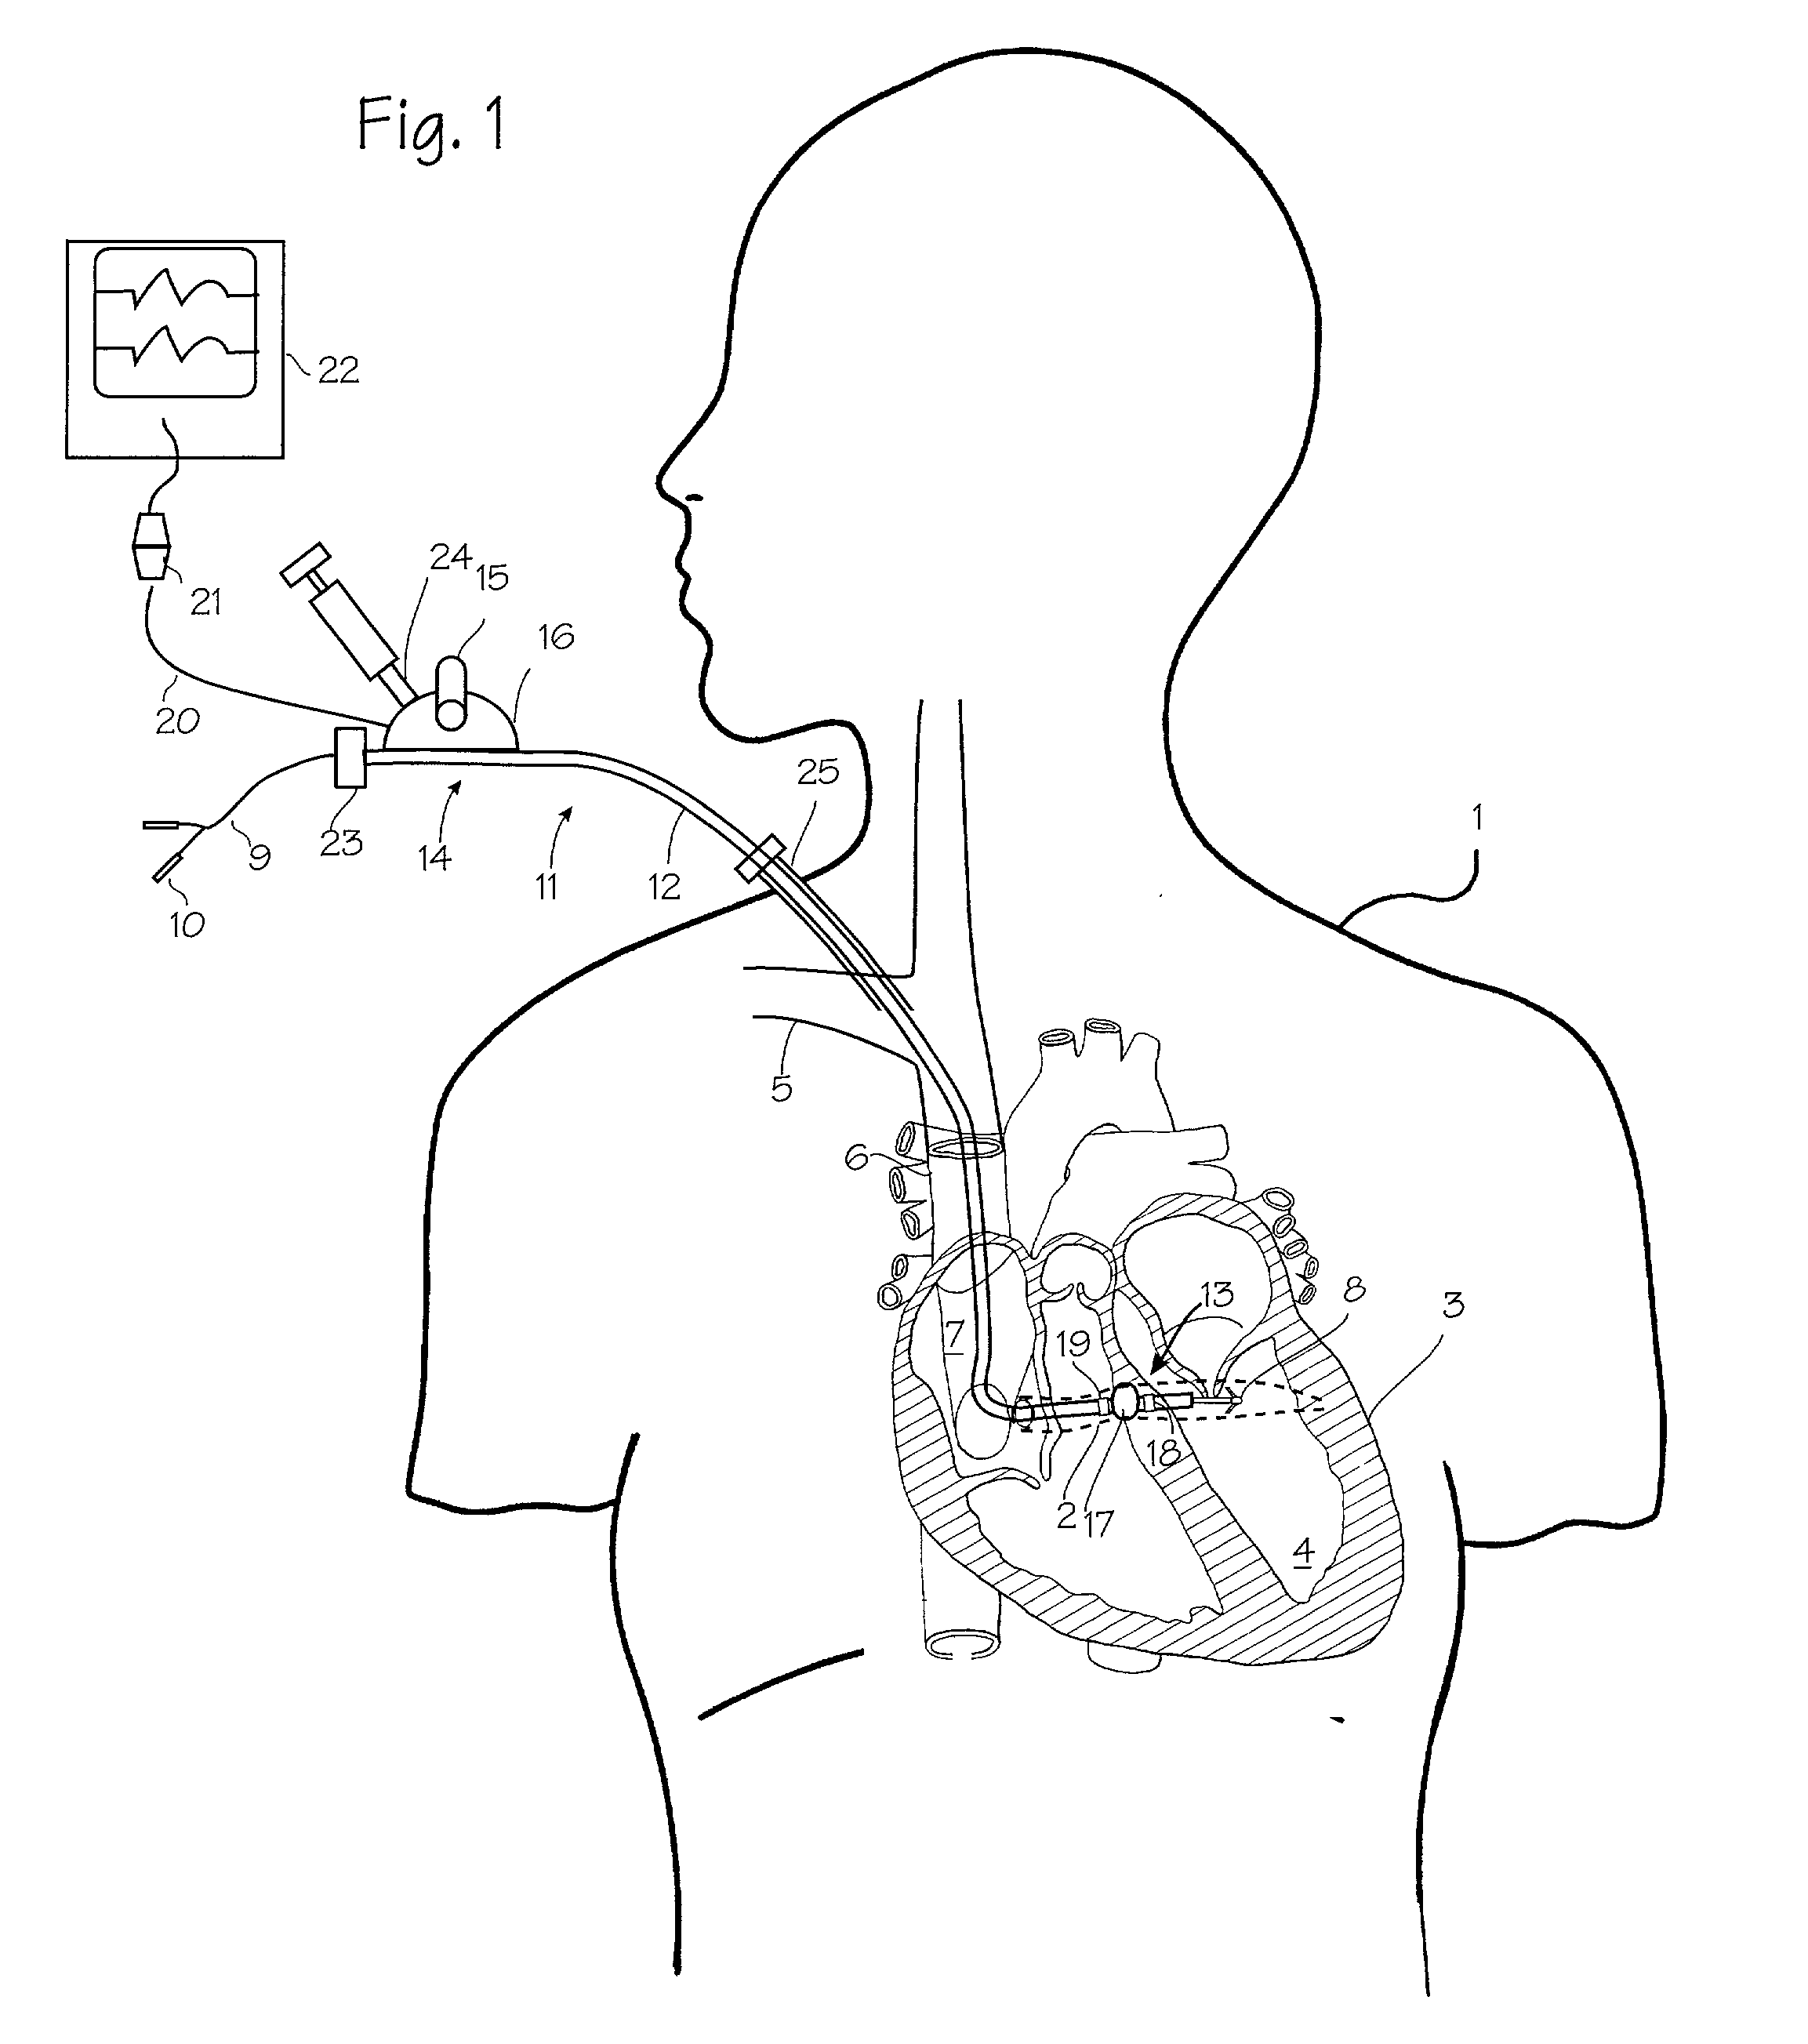 Catheter systems and methods for placing bi-ventricular pacing leads